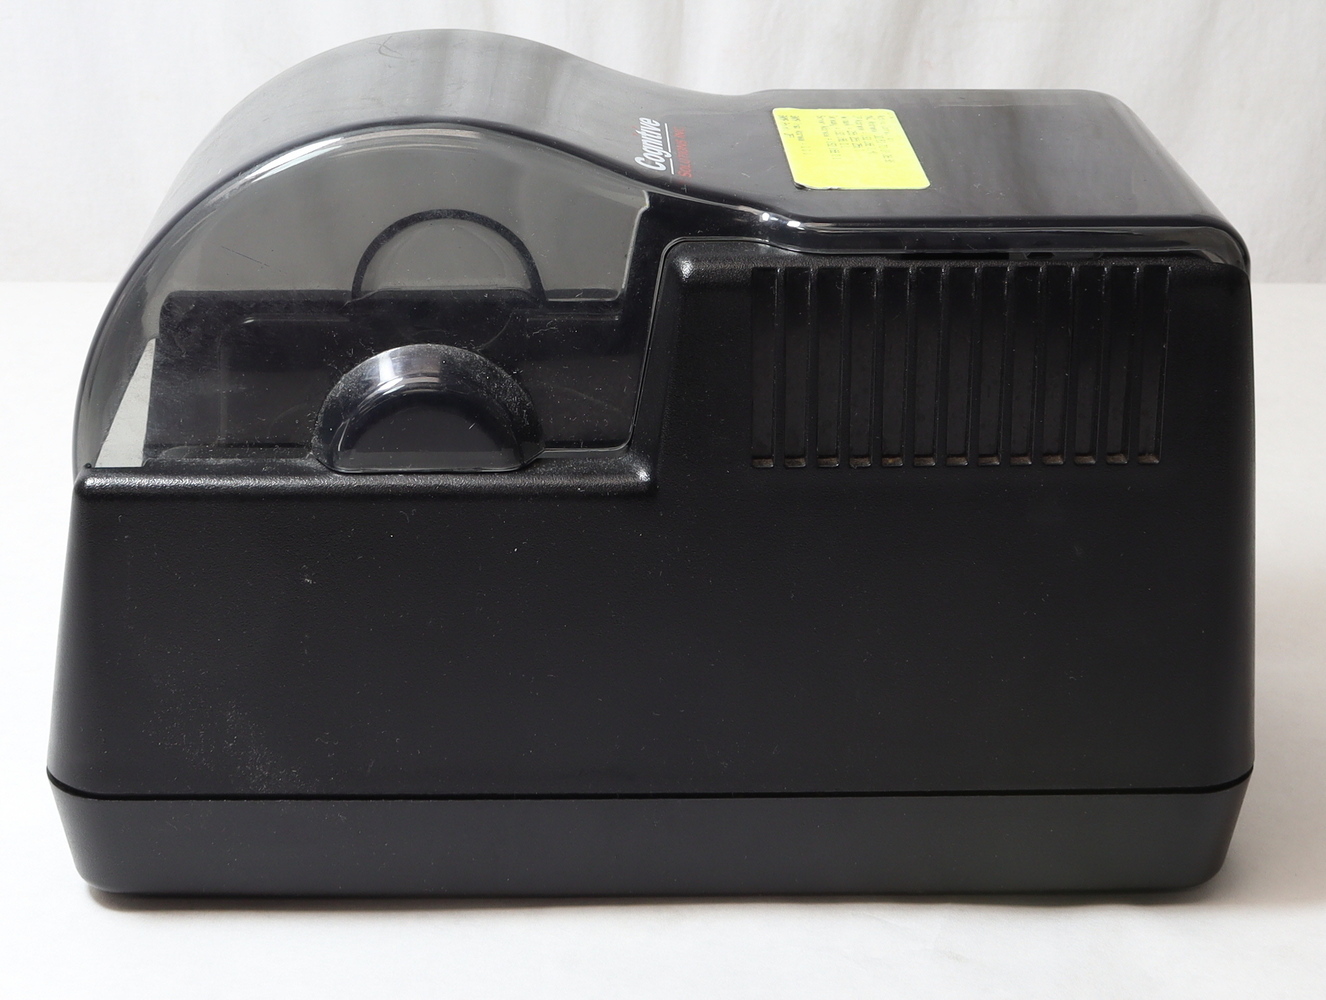 dlxi label printer dbt24-2084-g1e (parts only)